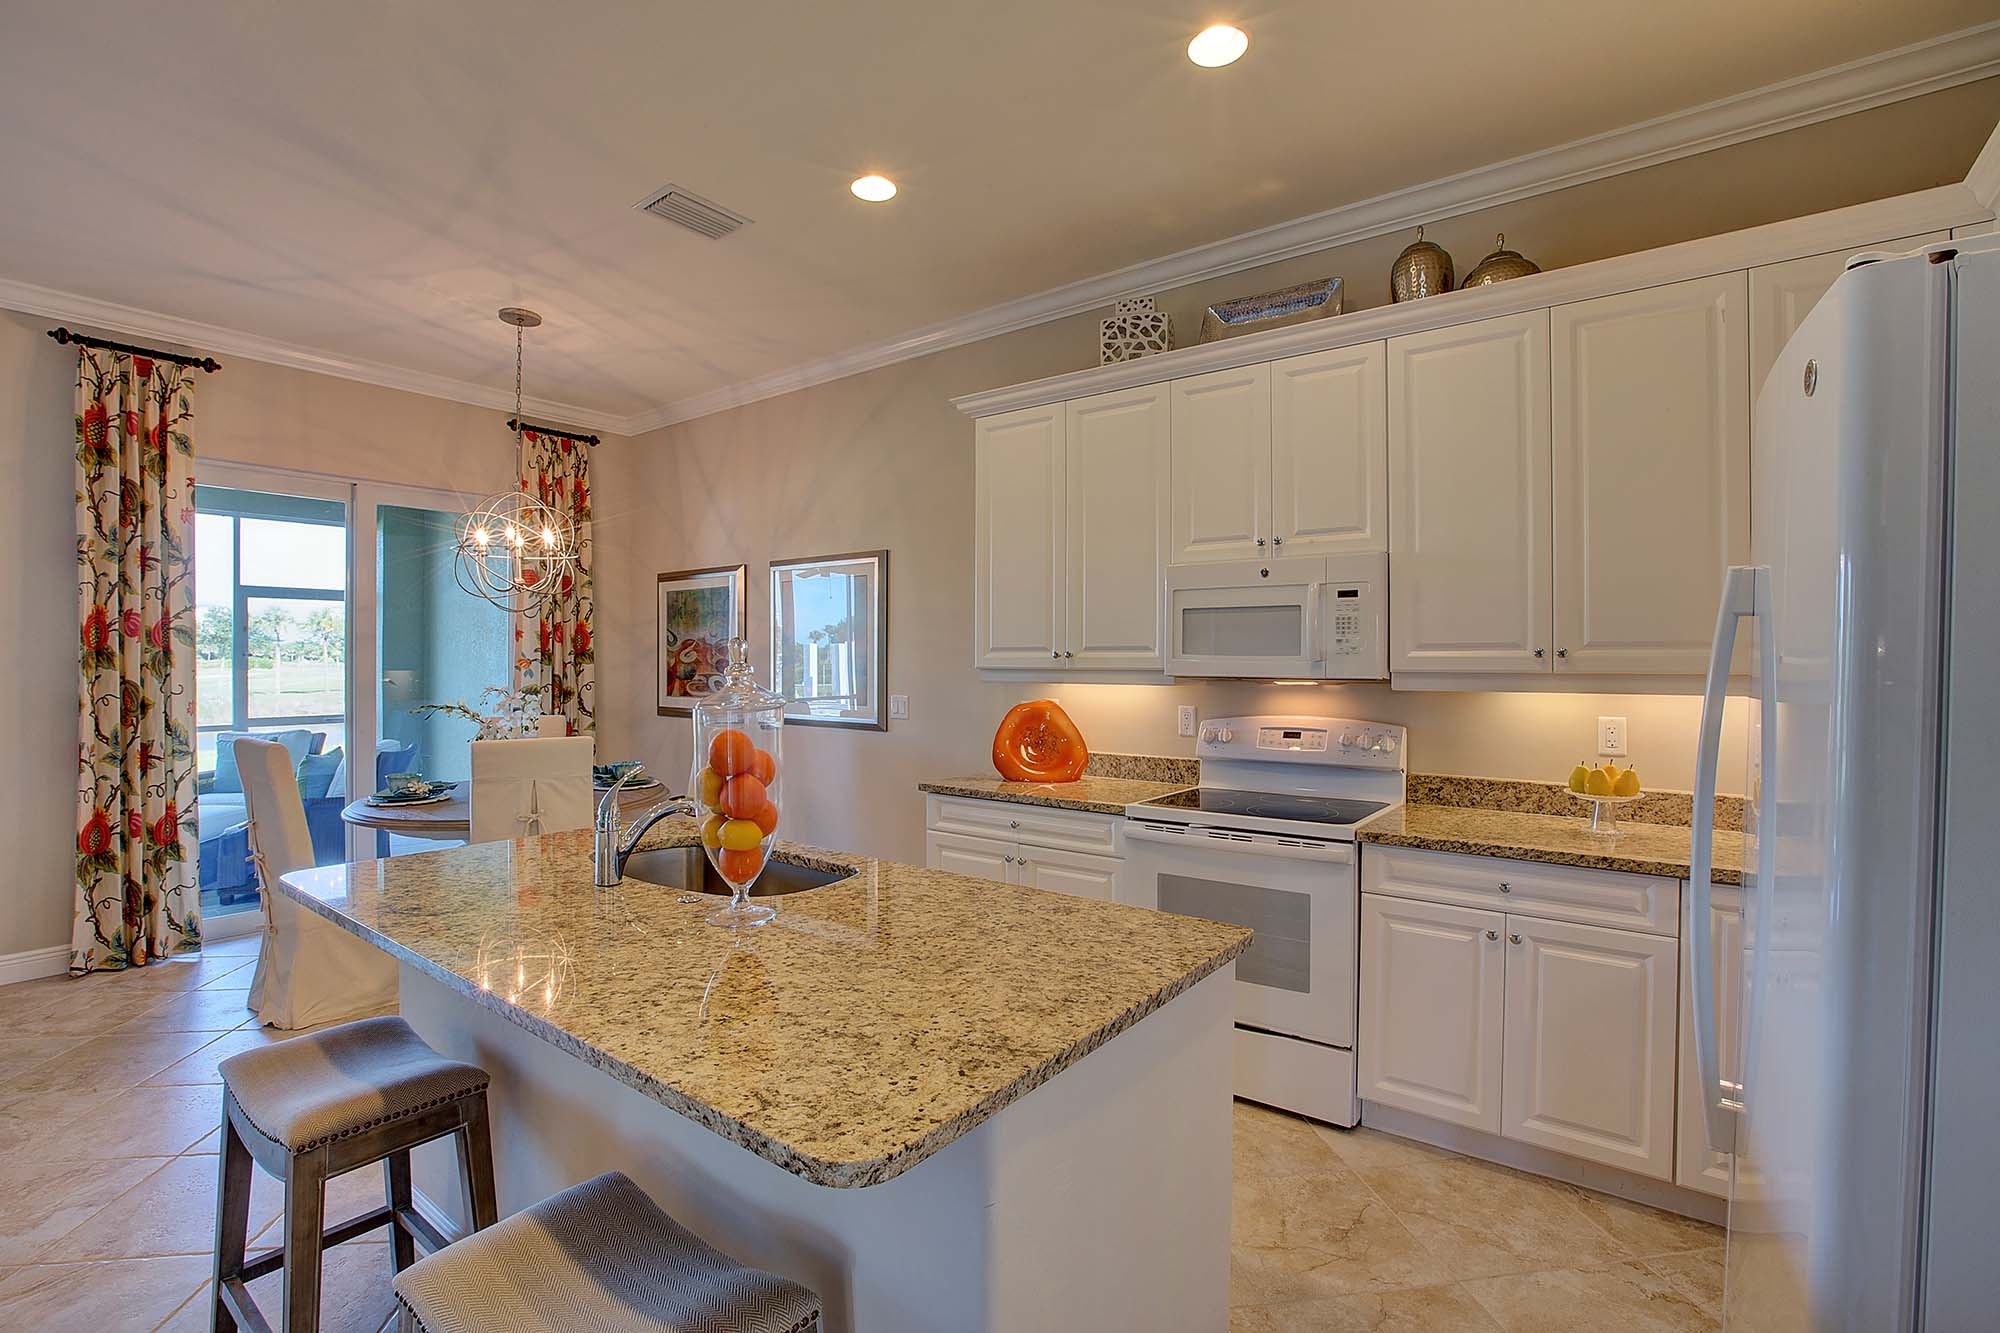 The kitchen in the Captiva Model Home at Shell Point Retirement Community